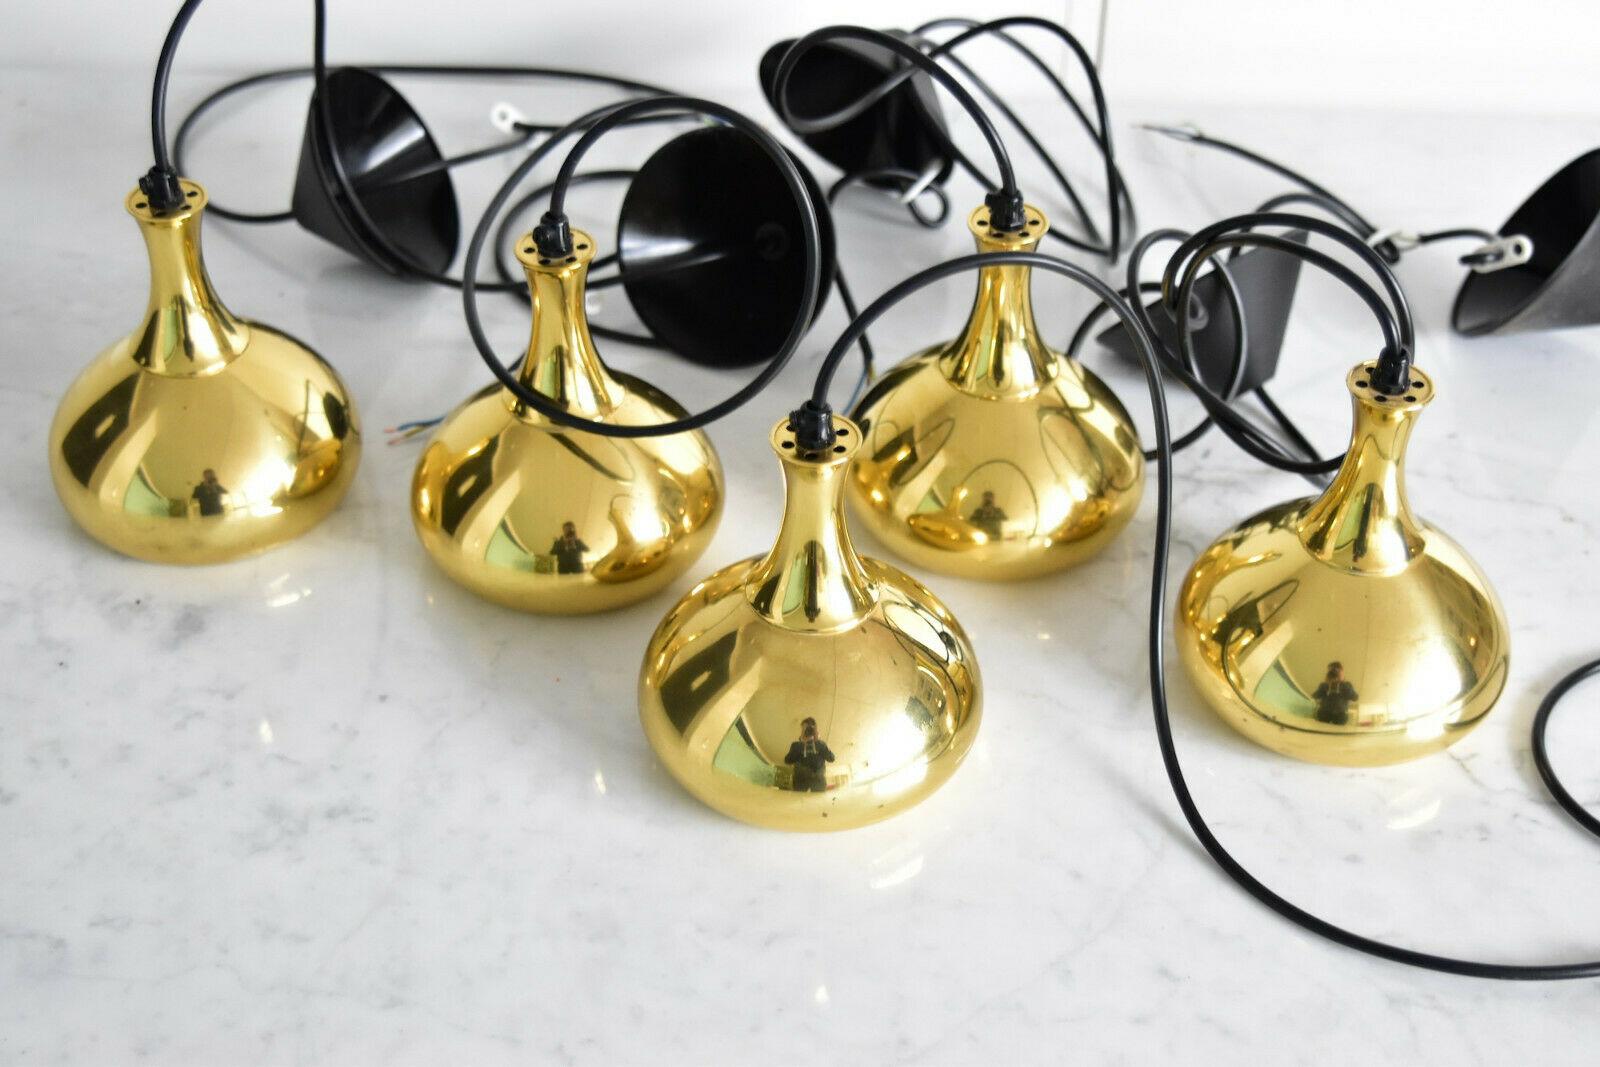 Small pendant light in brass designed by Hans-Agne Jakobsson and manufactured by Markaryd AB in Sweden during the late 1950s. The lamp comes with a new black plastic cord and a black ceiling rose. Ready to use worldwide with E14 Edison socket. Very